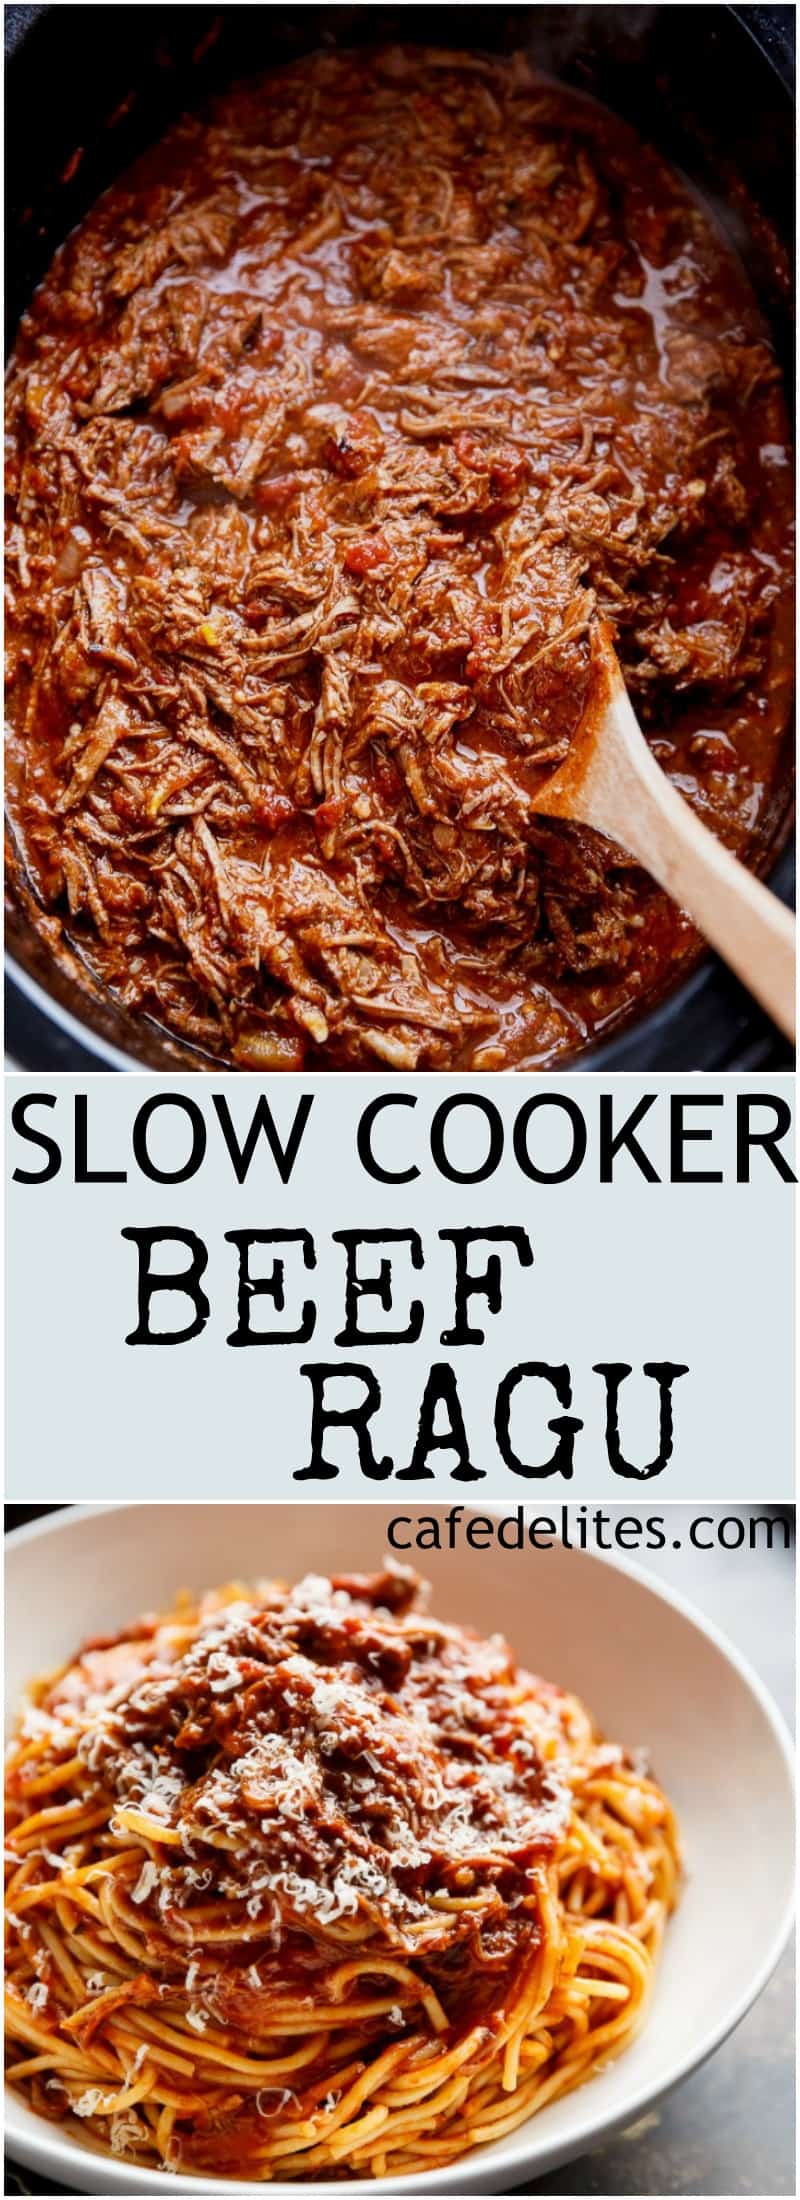 IV. Tips for Successful Slow Cooking